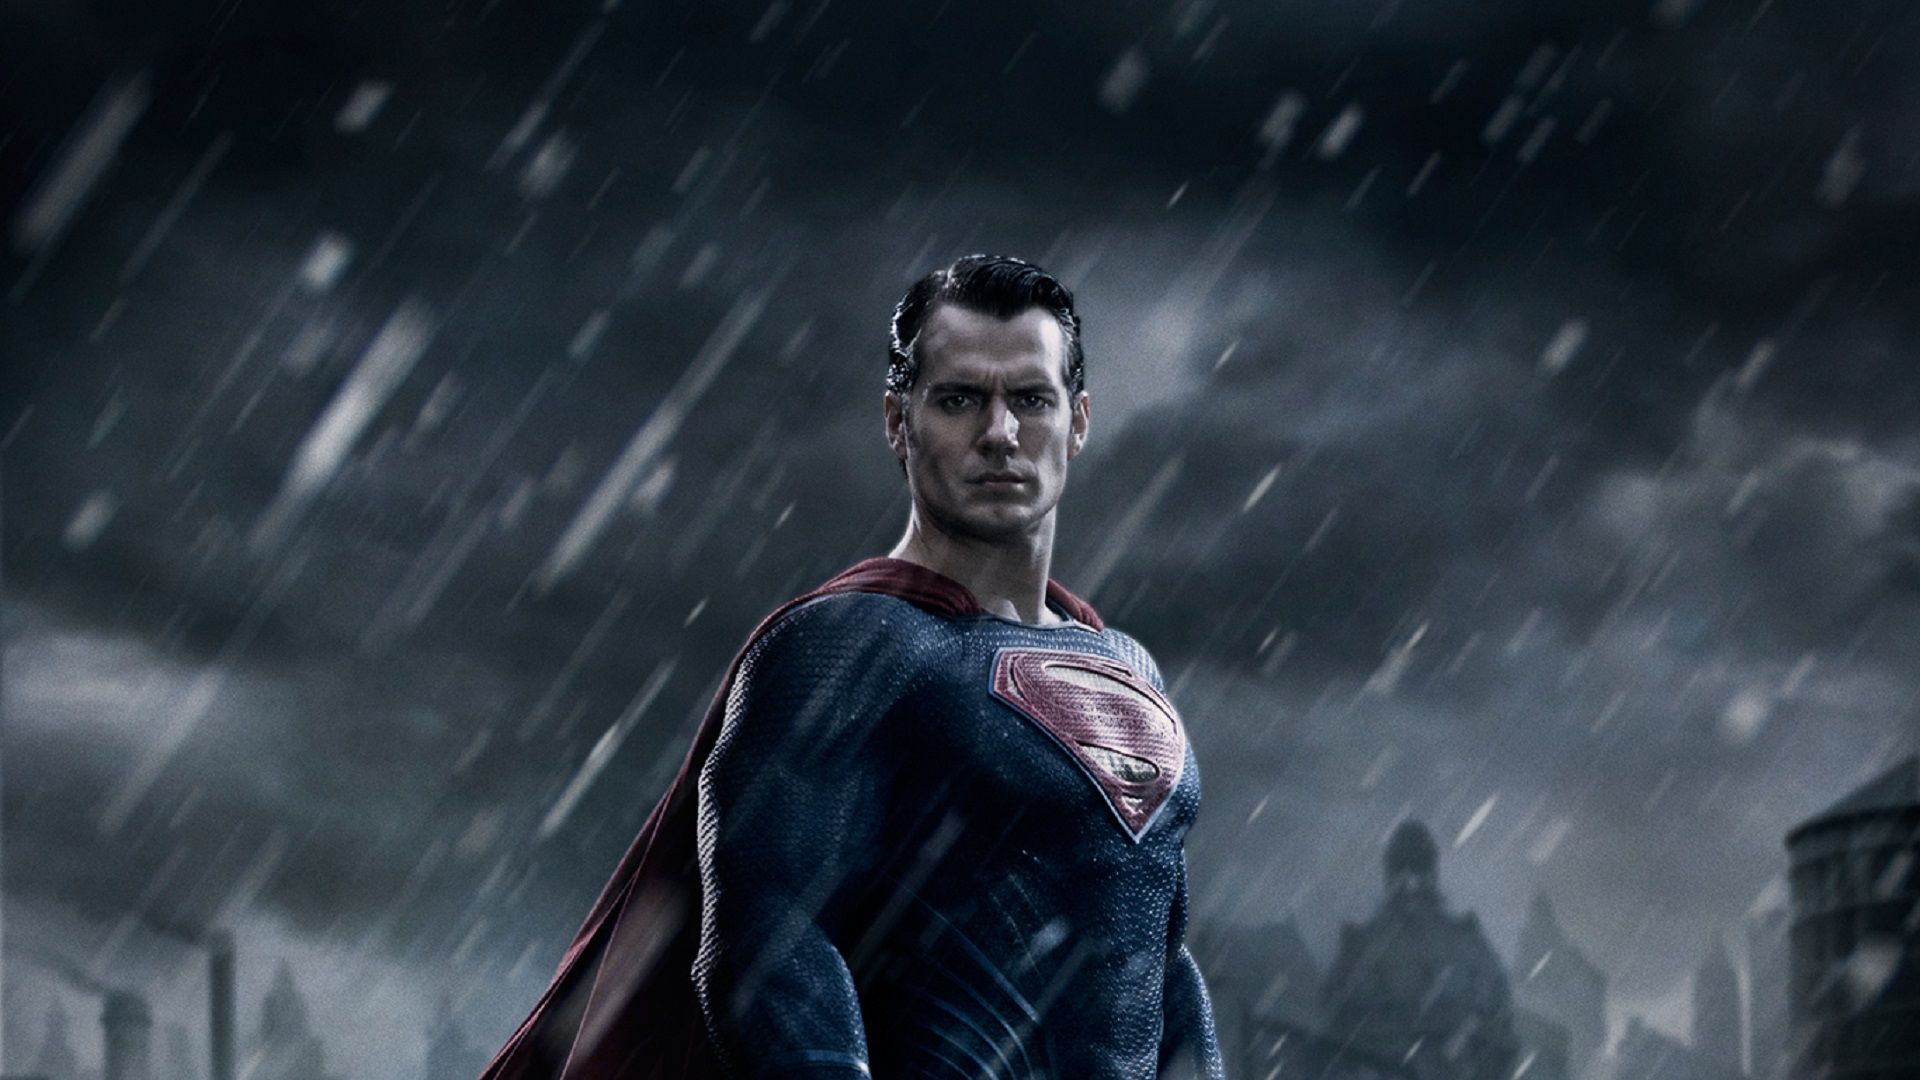 Henry Cavill's Superman Replacement Casting Enters Into New Phase